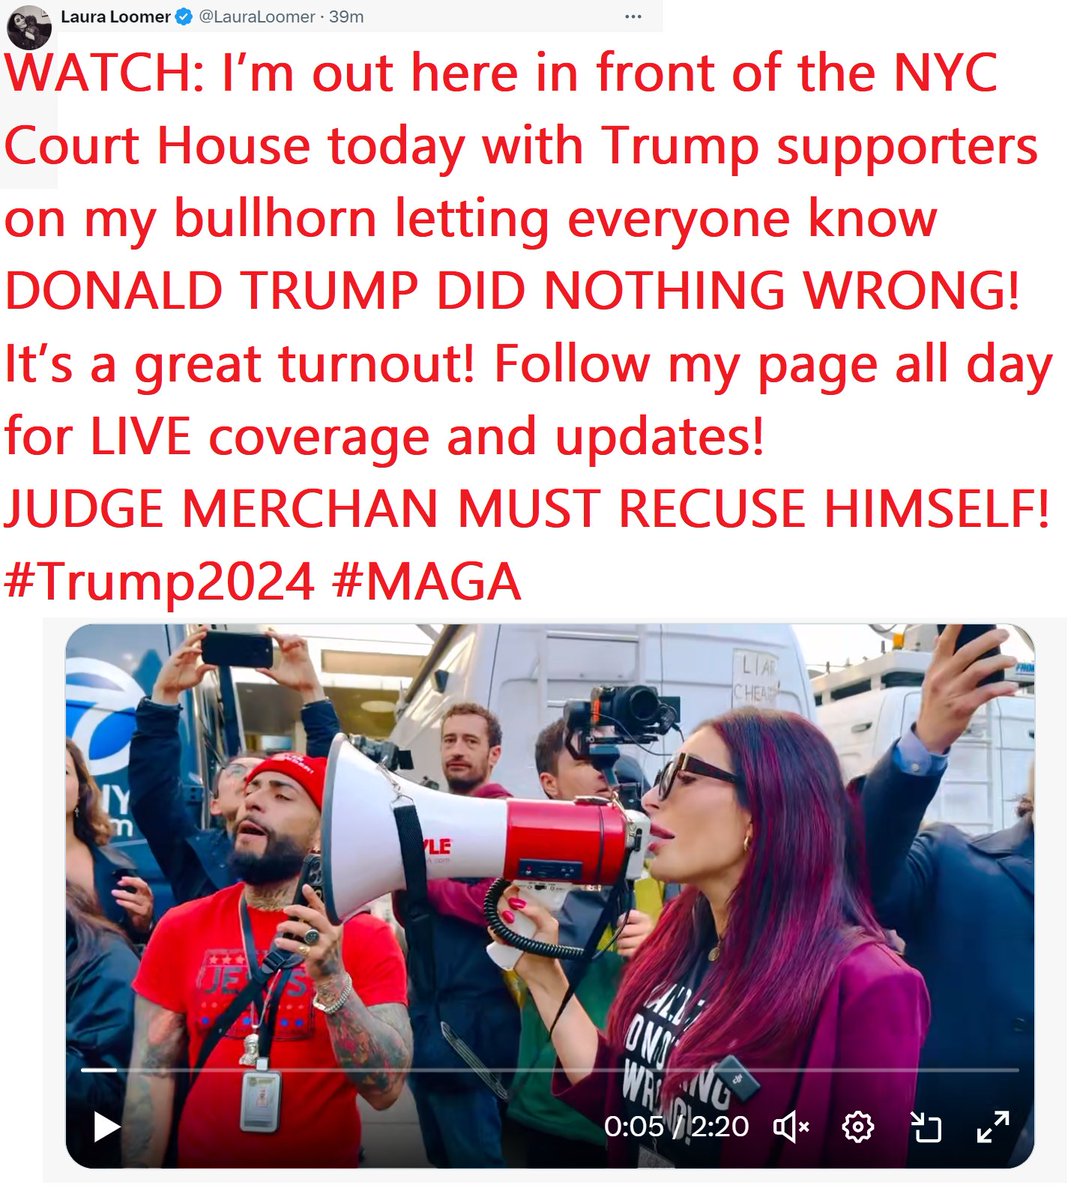 🇺🇸❤️PATRIOT FOLLOW TRAIN❤️🇺🇸 🇺🇸❤️HAPPY MONDAY !❤️🇺🇸 🇺🇸❤️DROP YOUR HANDLES ❤️🇺🇸 🇺🇸❤️FOLLOW OTHER PATRIOTS❤️🇺🇸 🔥❤️LIKE & RETWEET IFBAP❤️🔥 🇺🇸❤️PRAY FOR TRUMP❤️🇺🇸 WATCH: I’m out here in front of the NYC Court House today with Trump supporters on my bullhorn letting everyone